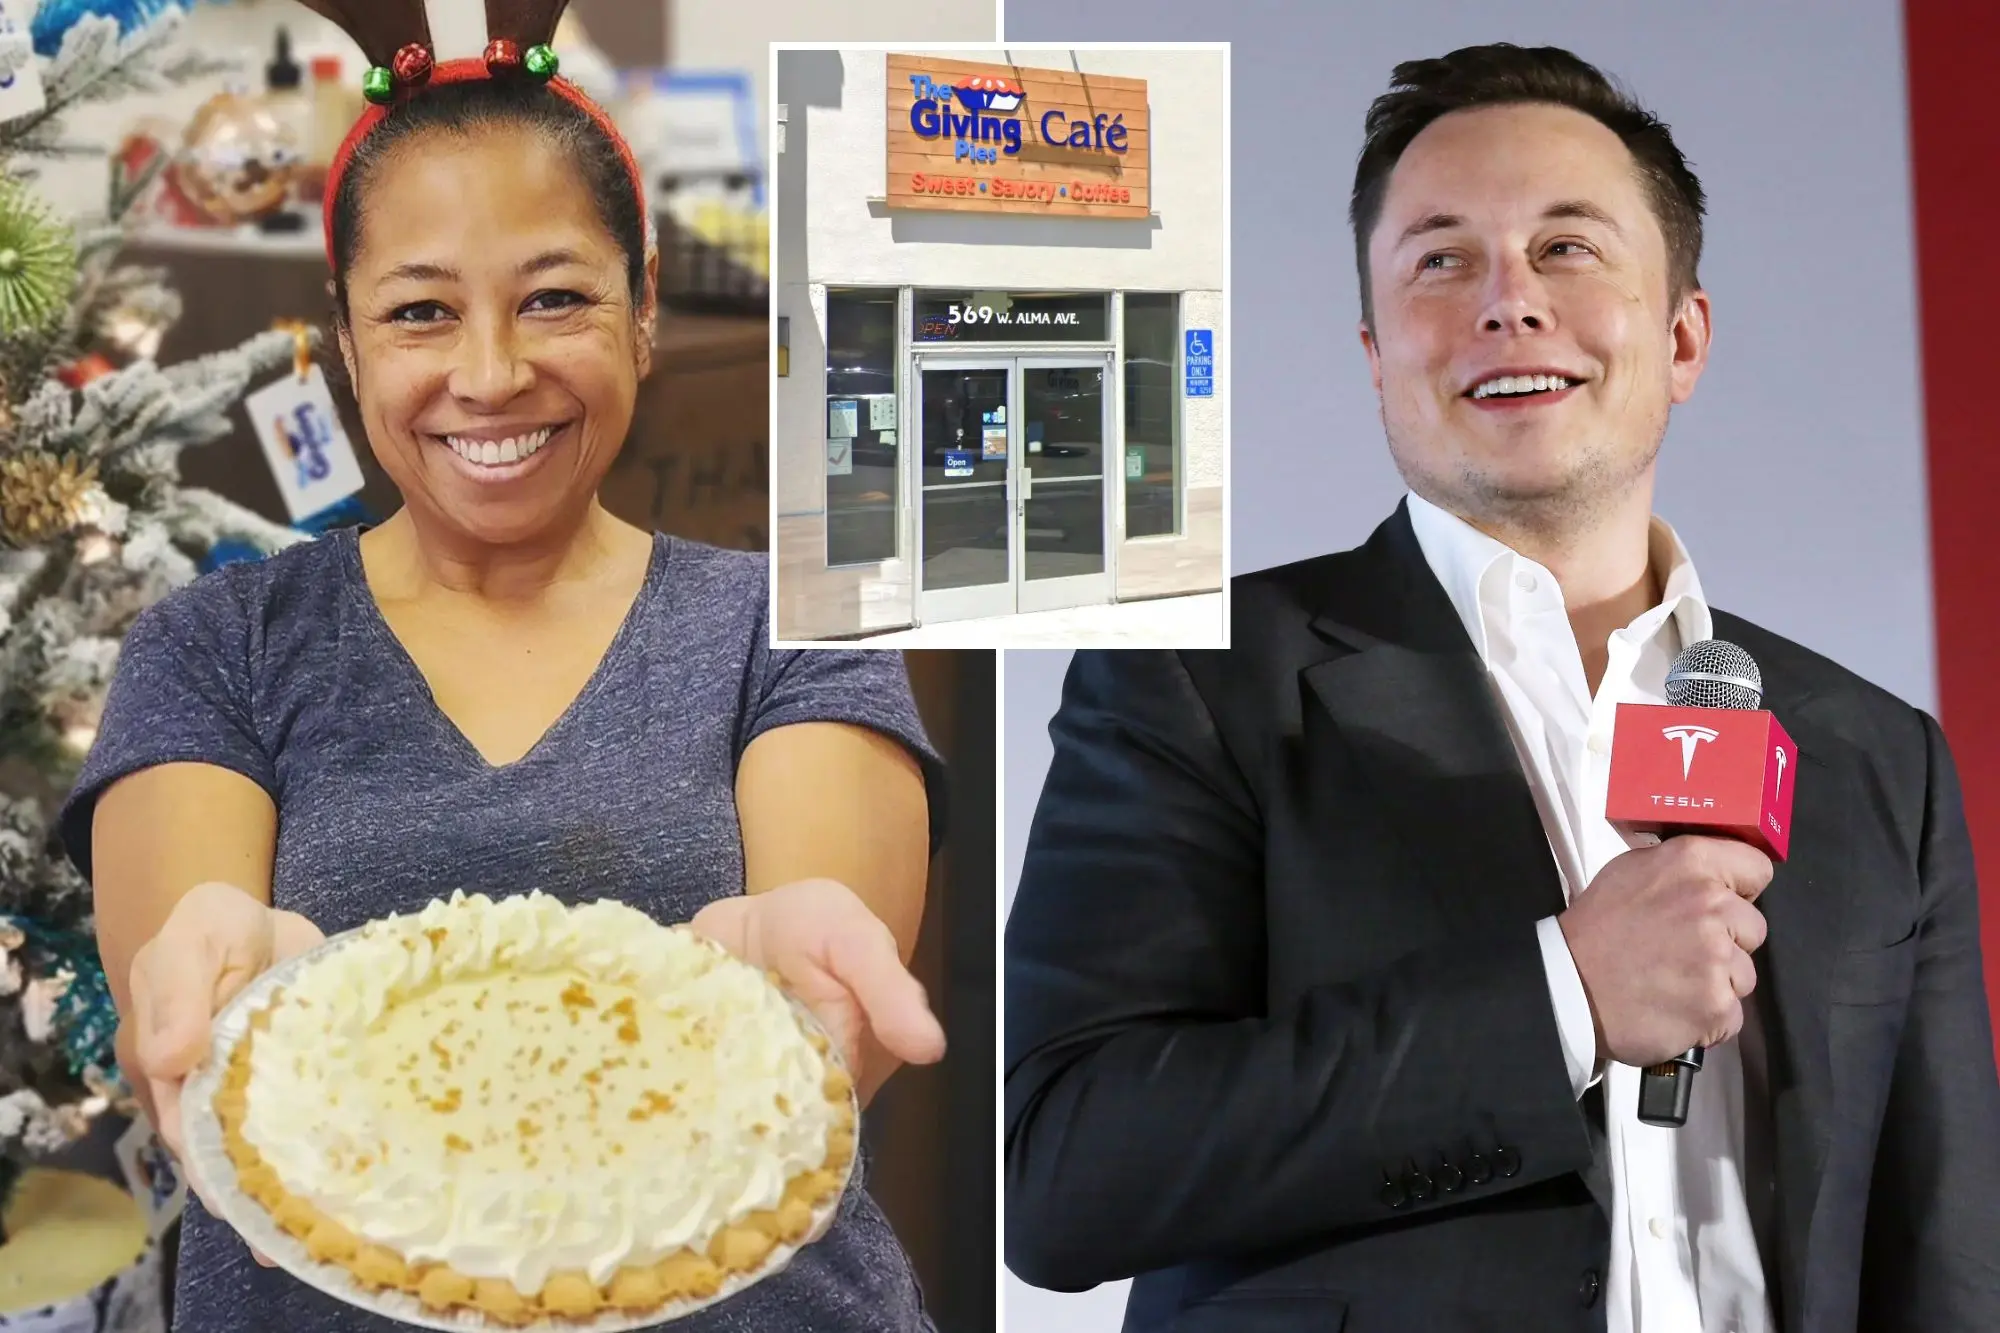 Tesla Rejected a Pie Order Which Turned Into a Big Win for Small Bakery With Elon Musk’s Help